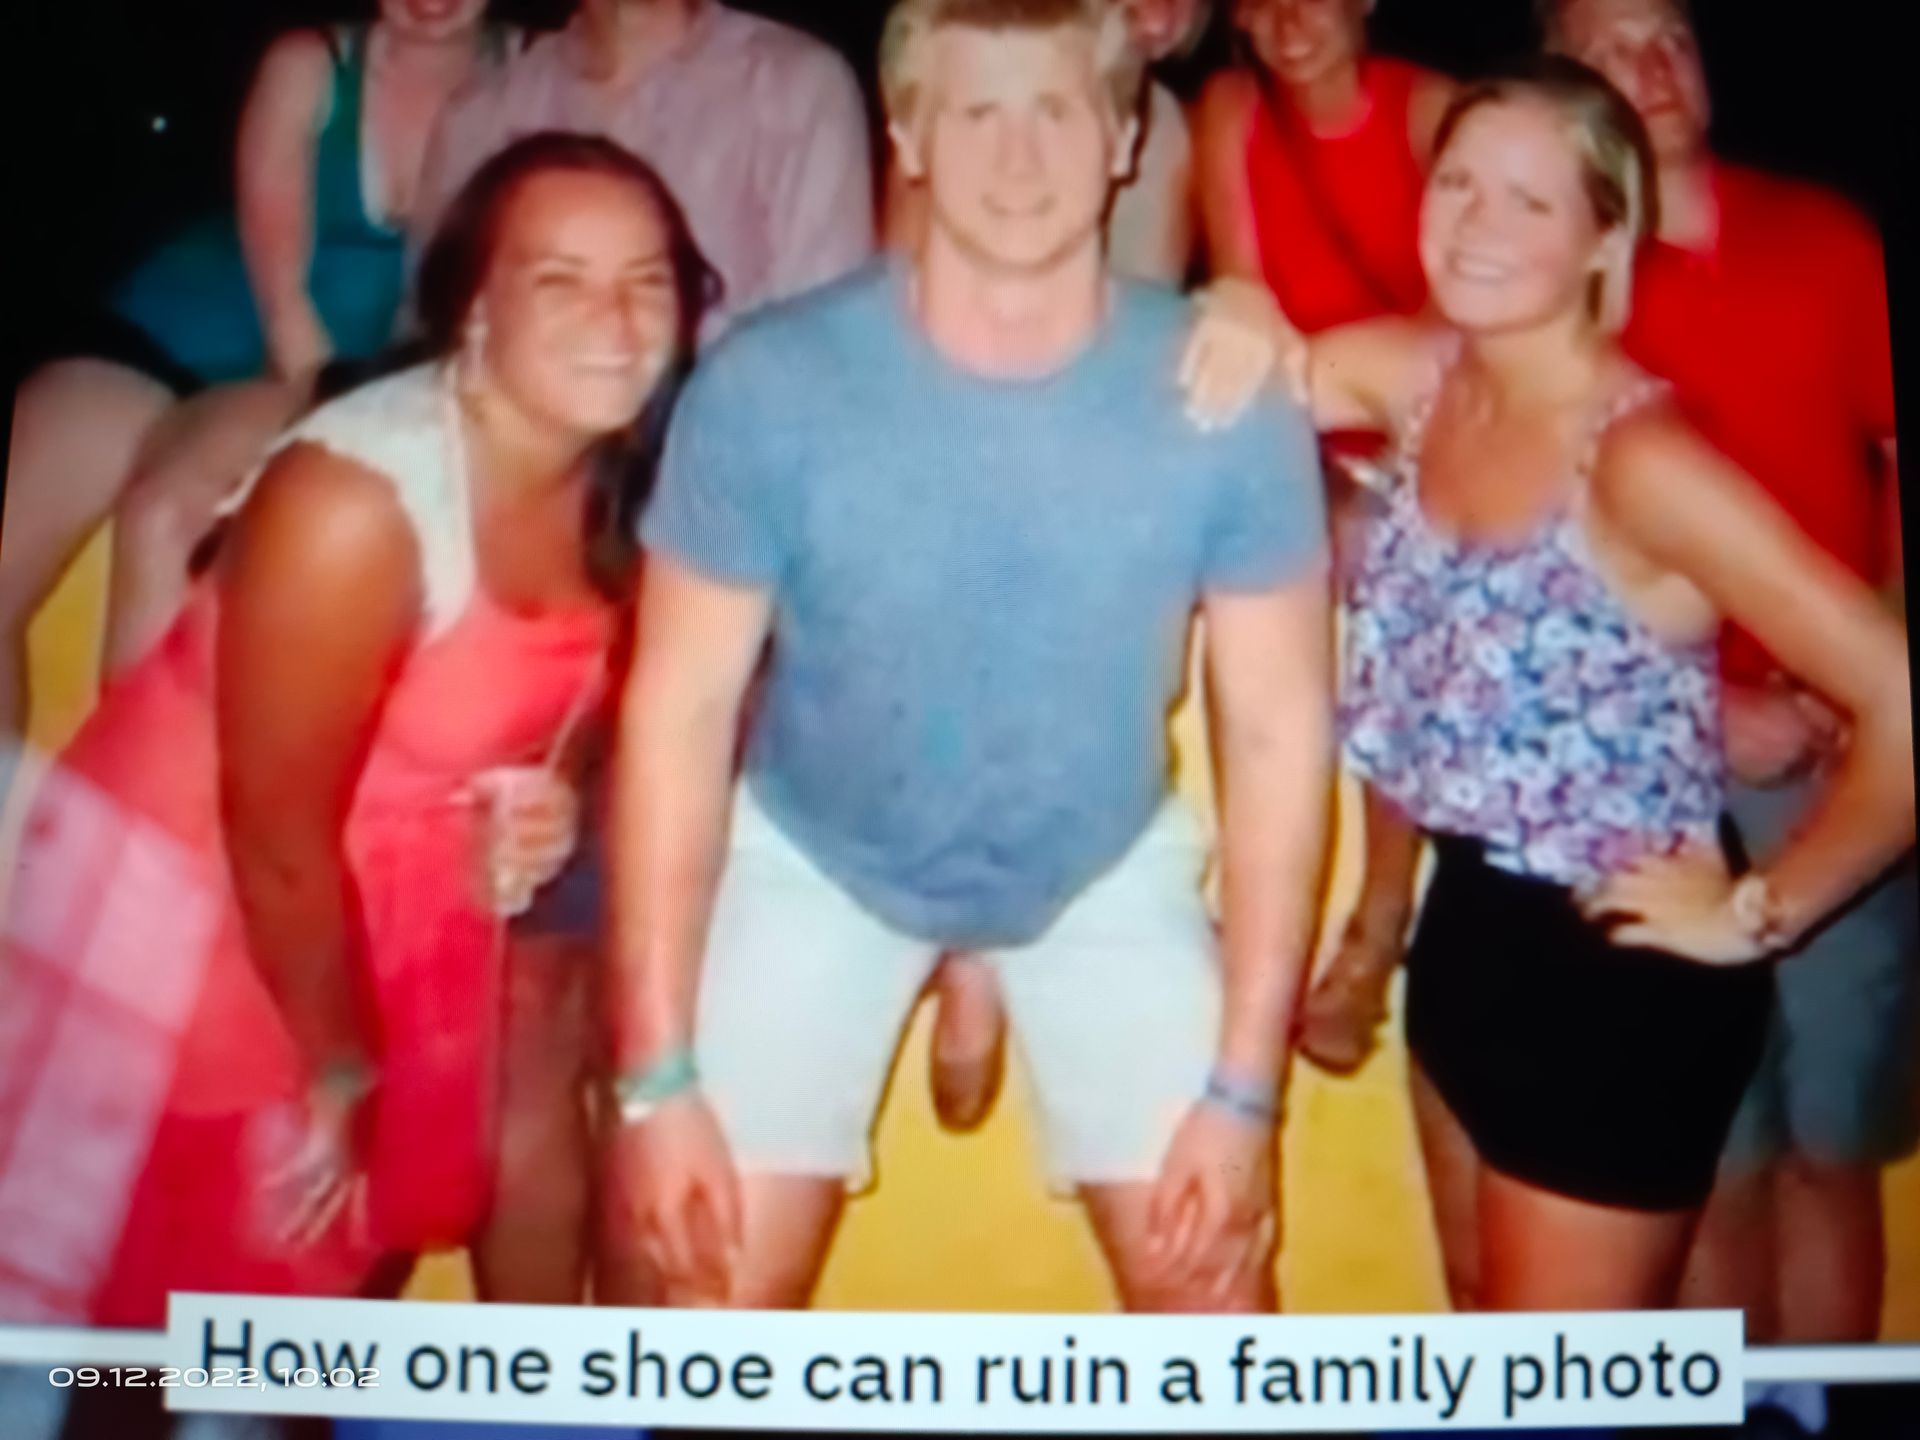 How one shoe can ruin a family photo
09.12.2022, 10:02